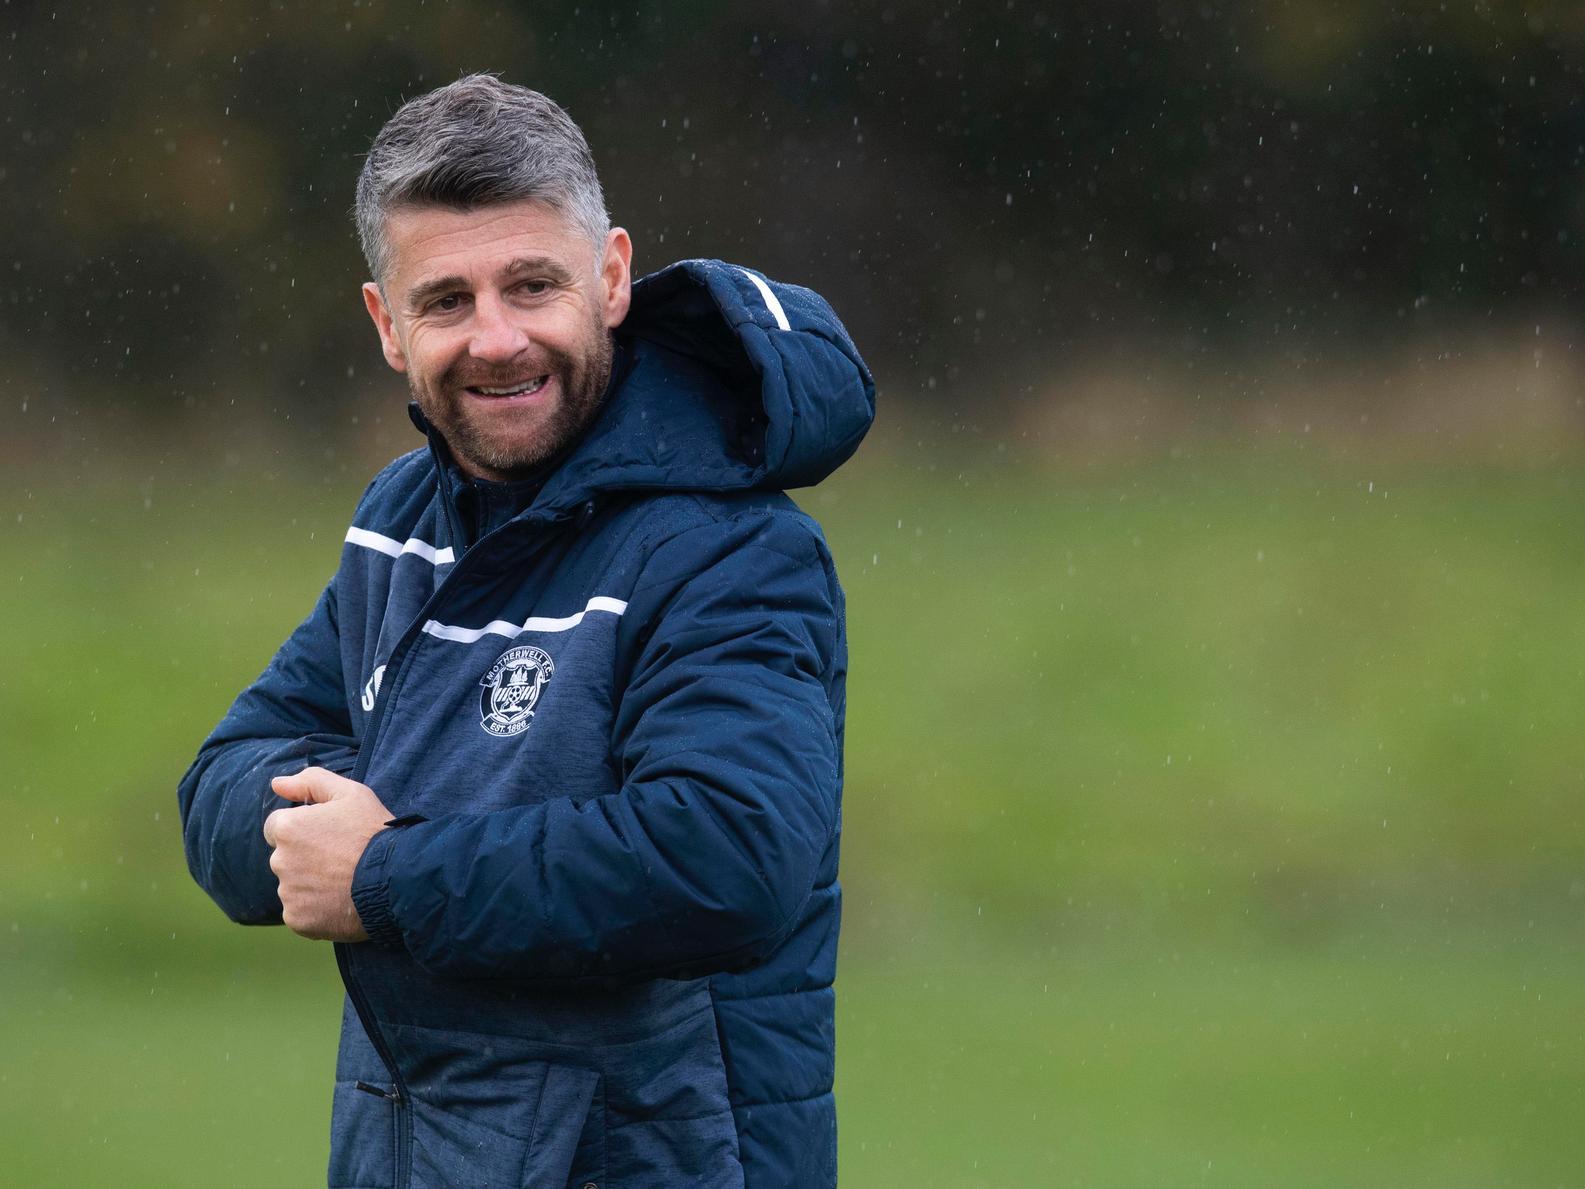 The Motherwell boss has successfully kept his club away from the relegation battle during his time in charge and has taken 'Well to two major finals. Also linked with Hearts.